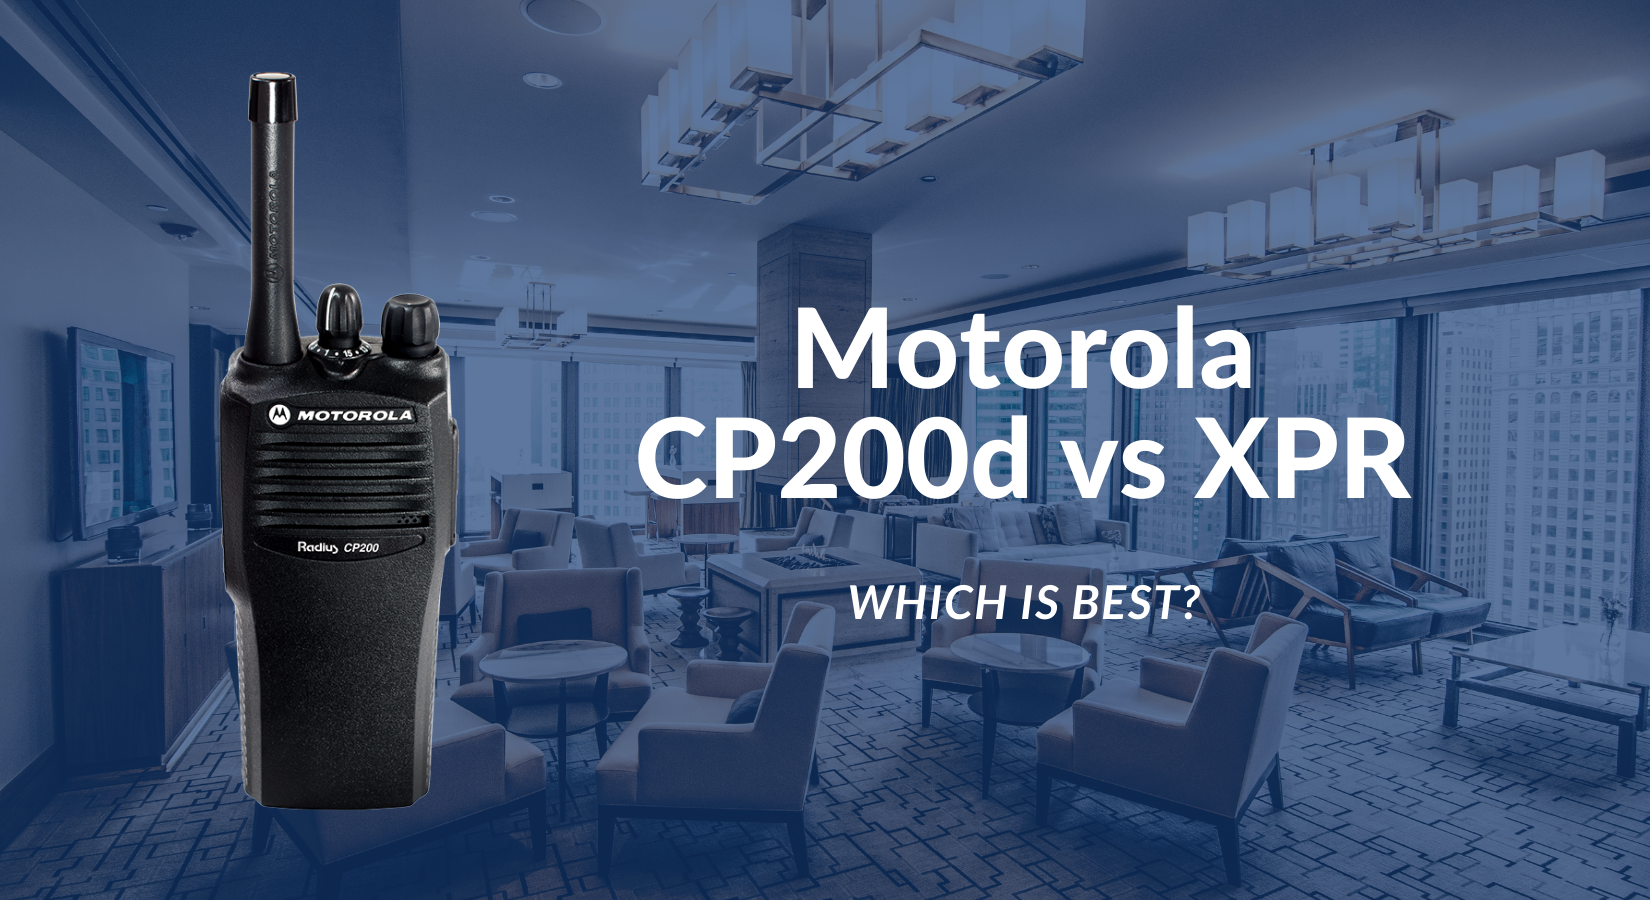 Motorola CP200d vs XPR. Which is best?